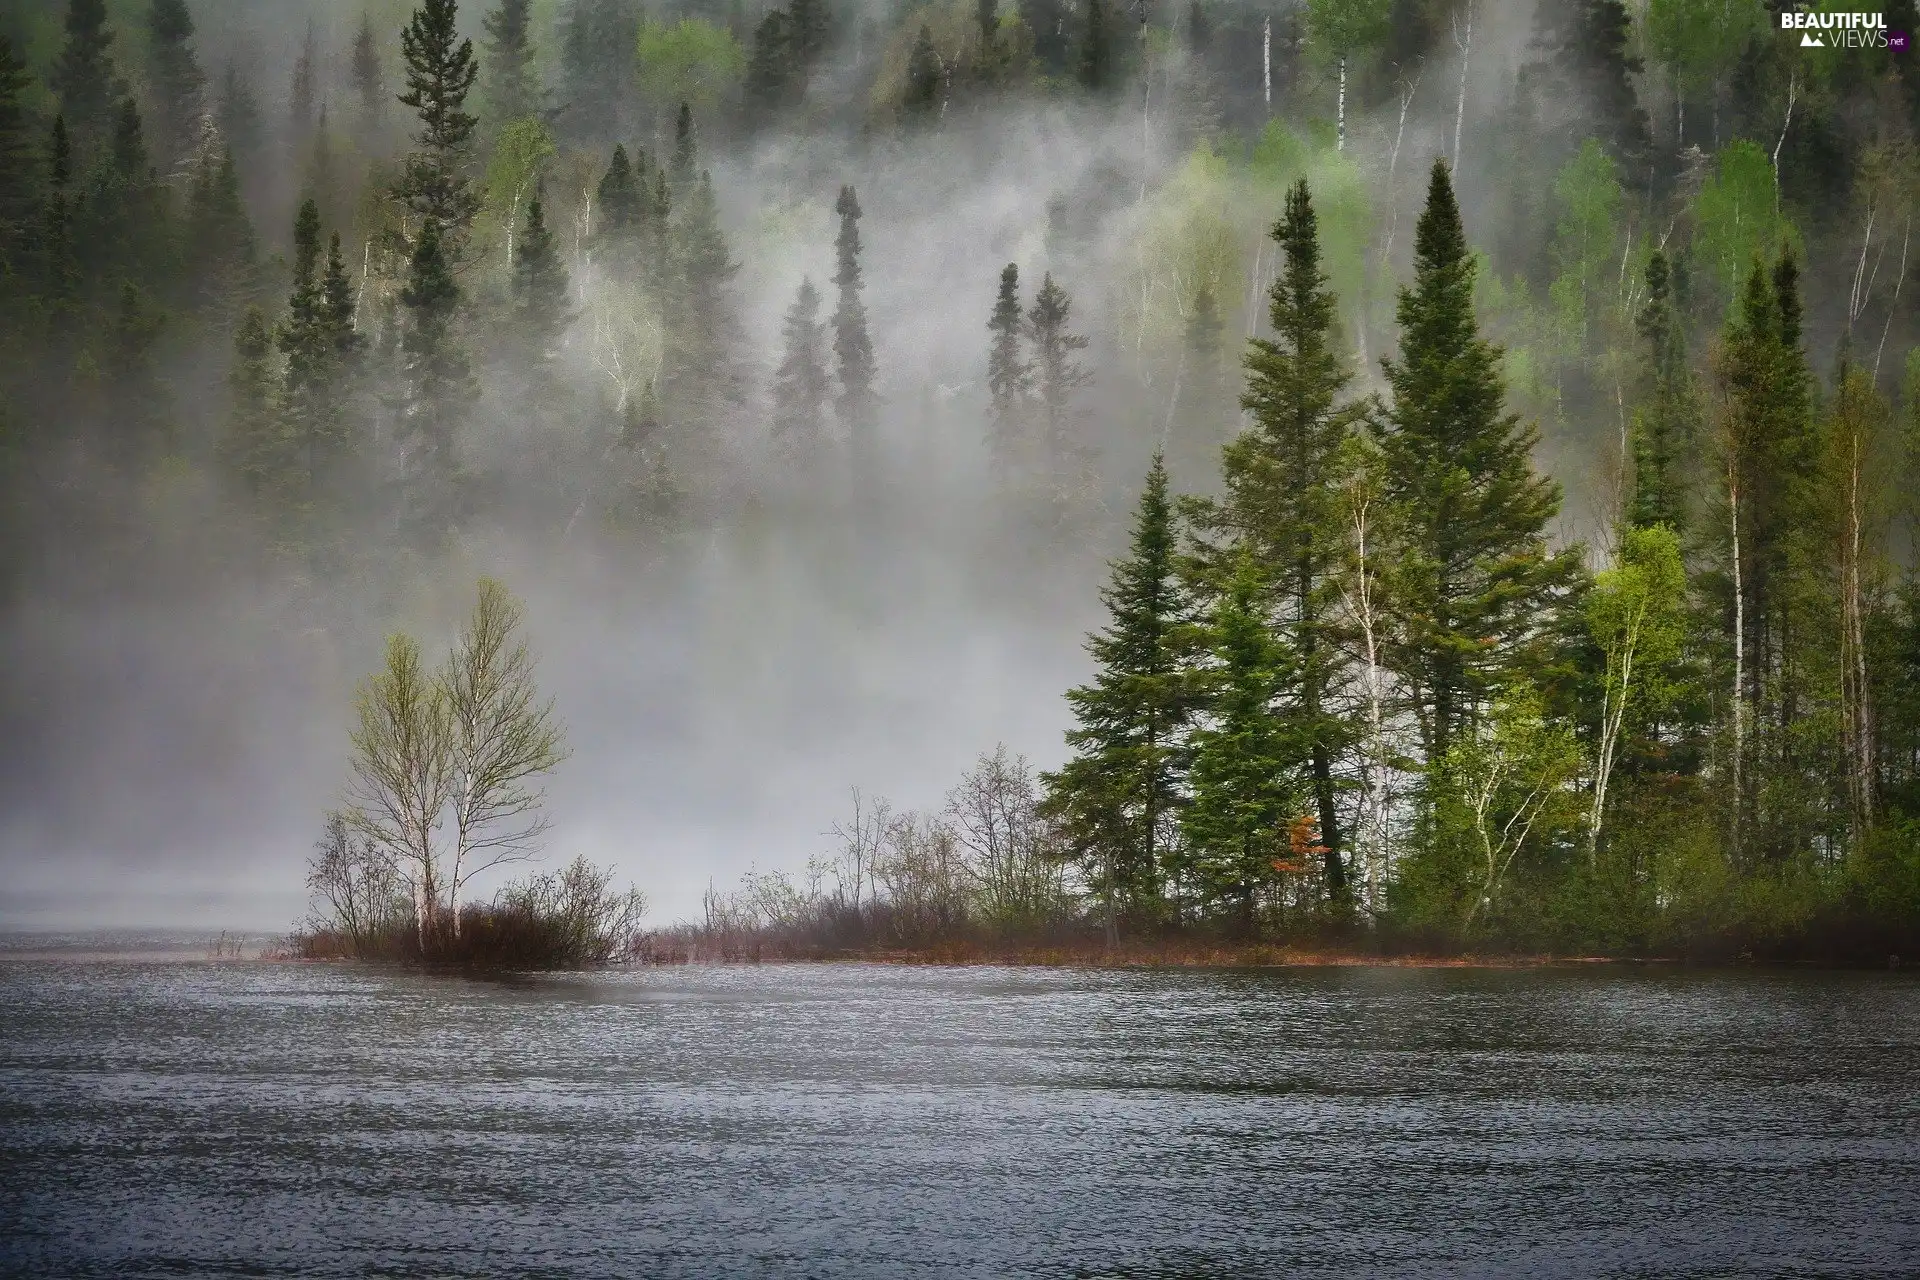 trees, viewes, forest, lake, Fog